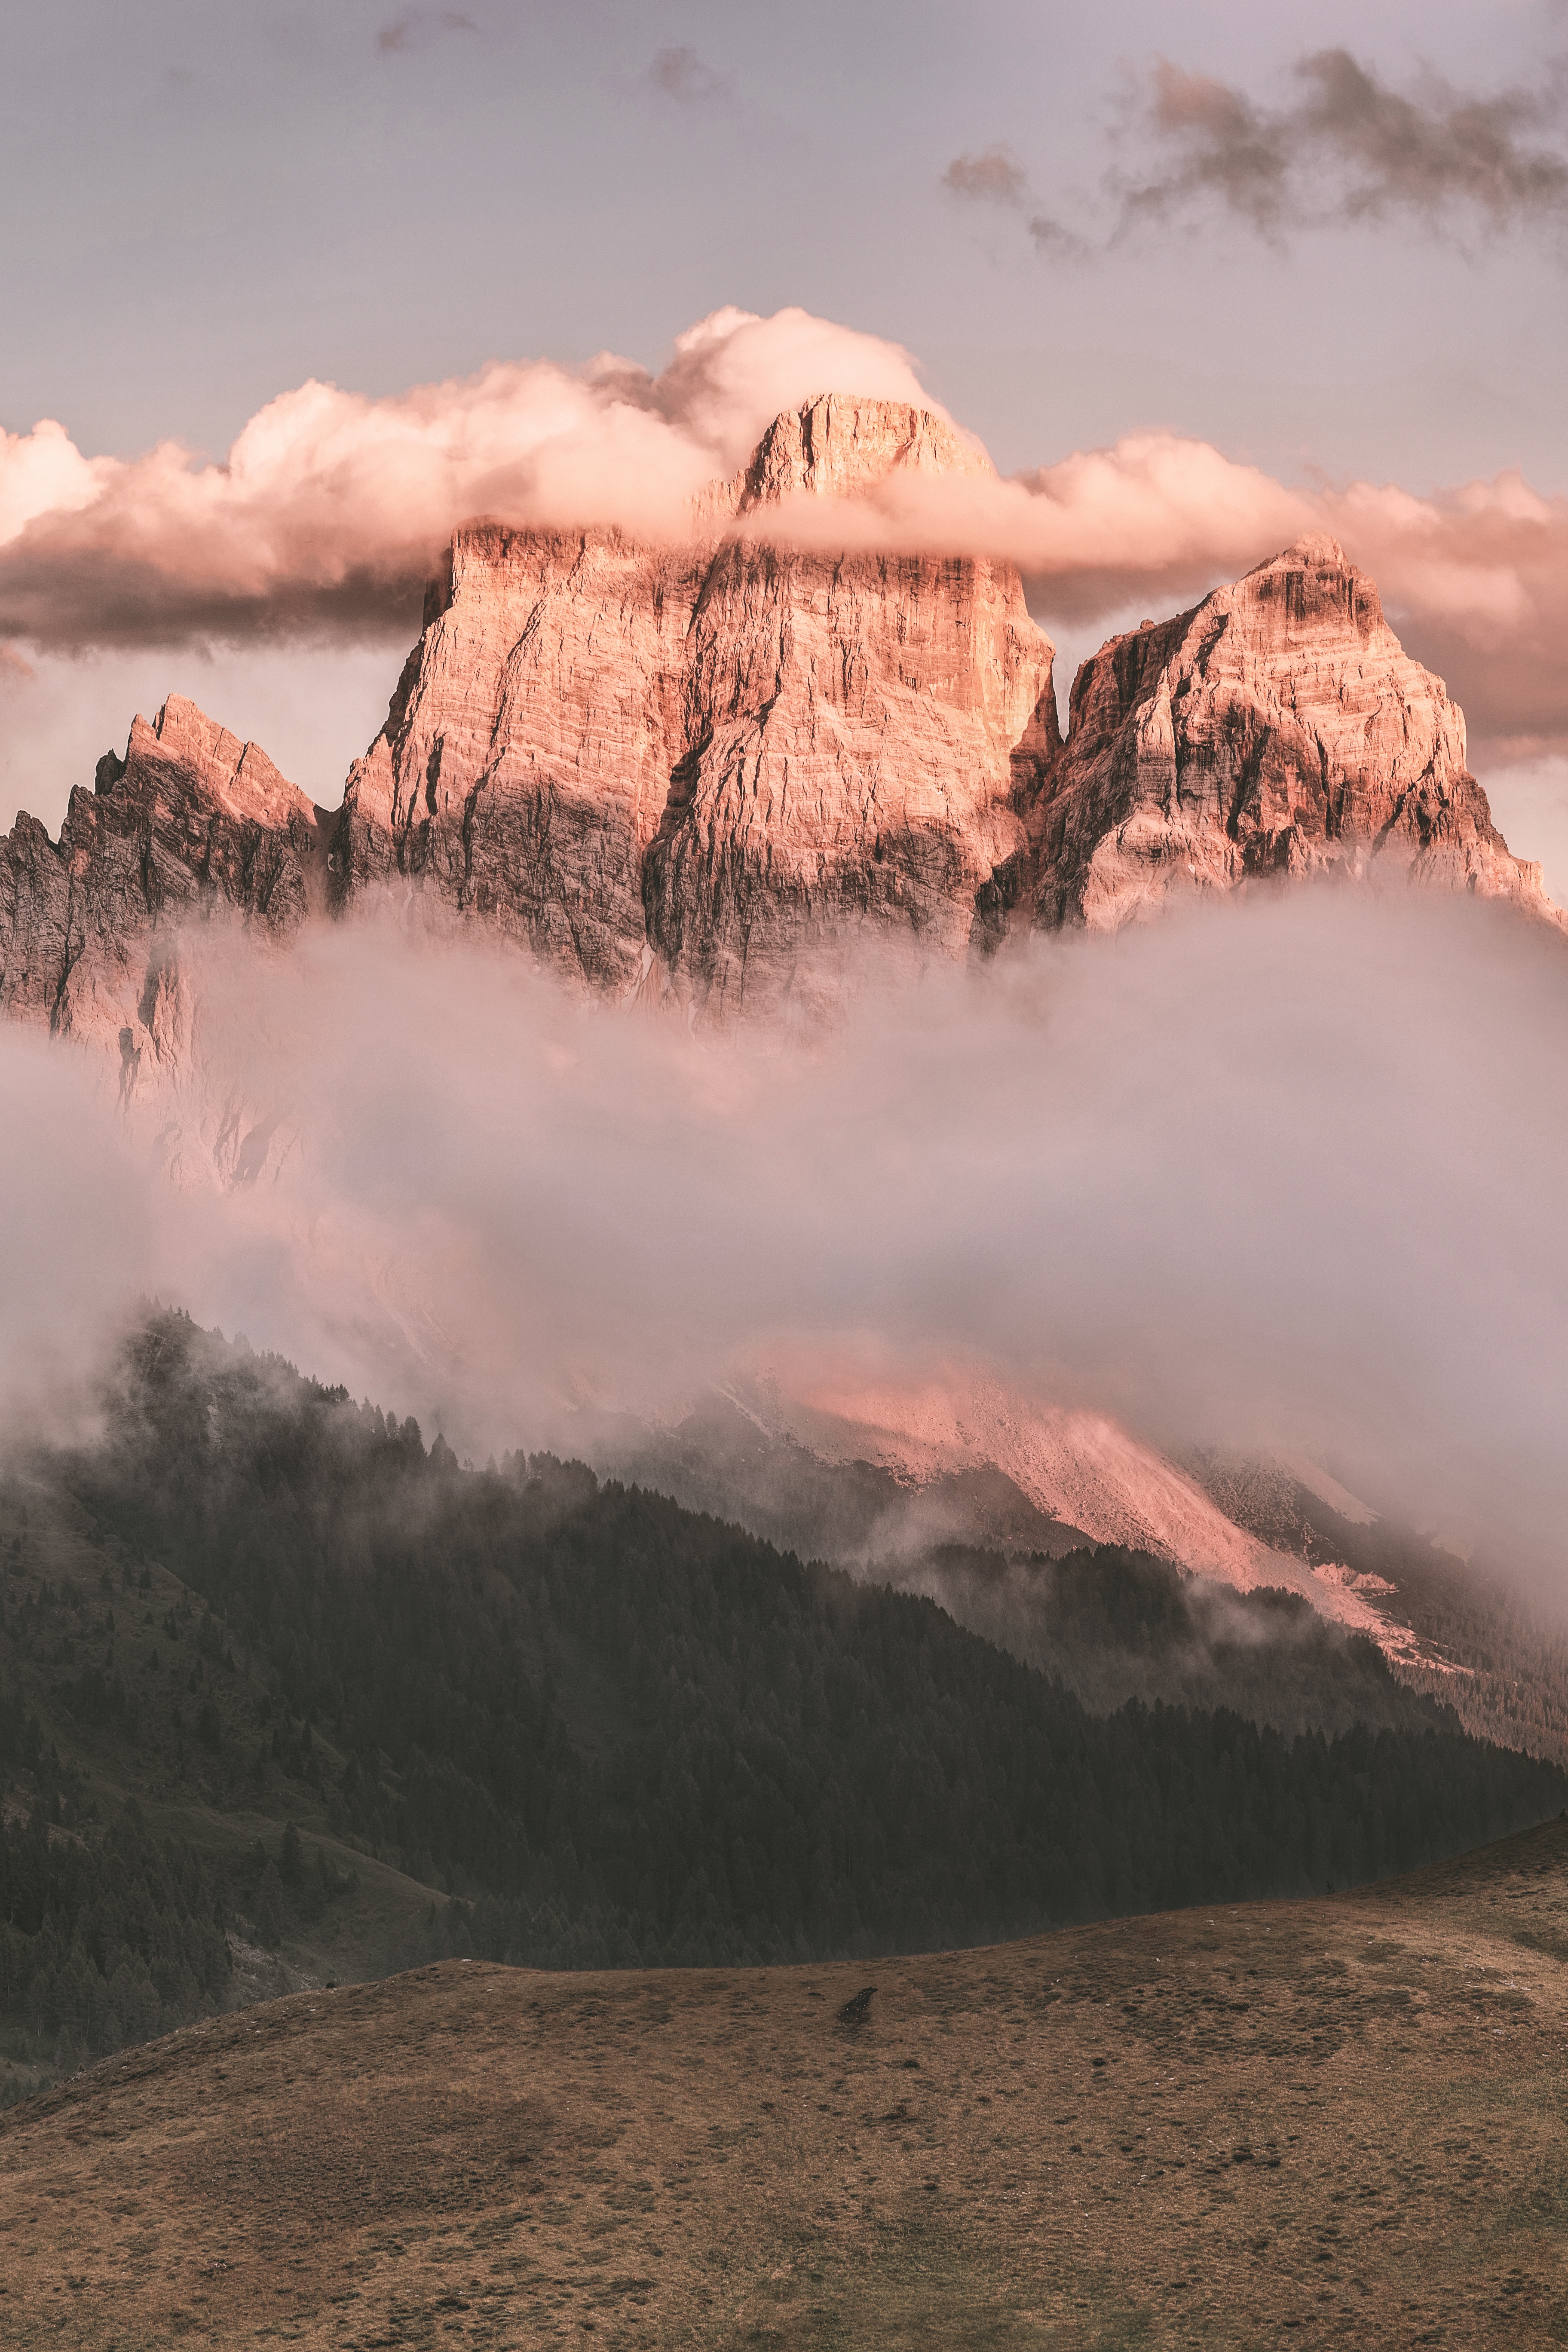 Full HD italy, nature, clouds, mountain, dolomites, monte pelmo